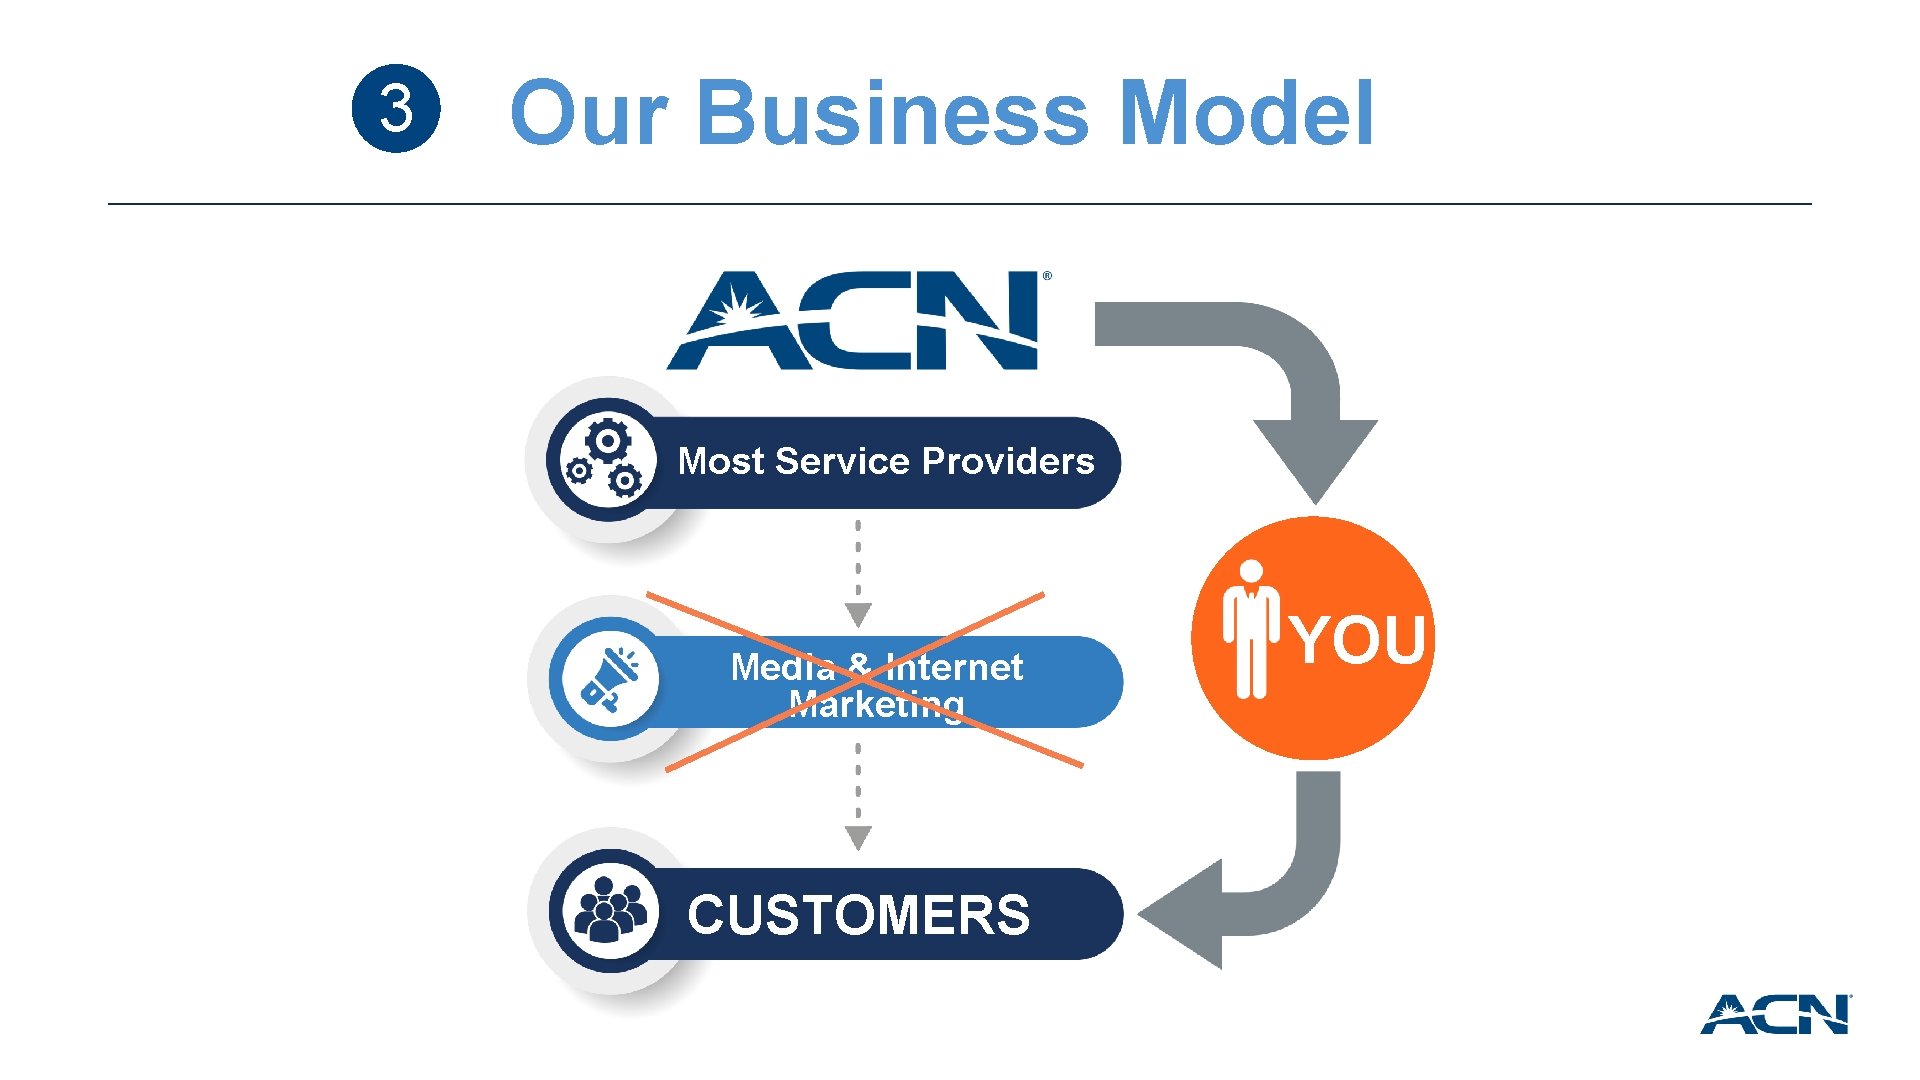 3 Our Business Model Most Service Providers Media & Internet Marketing CUSTOMERS YOU 